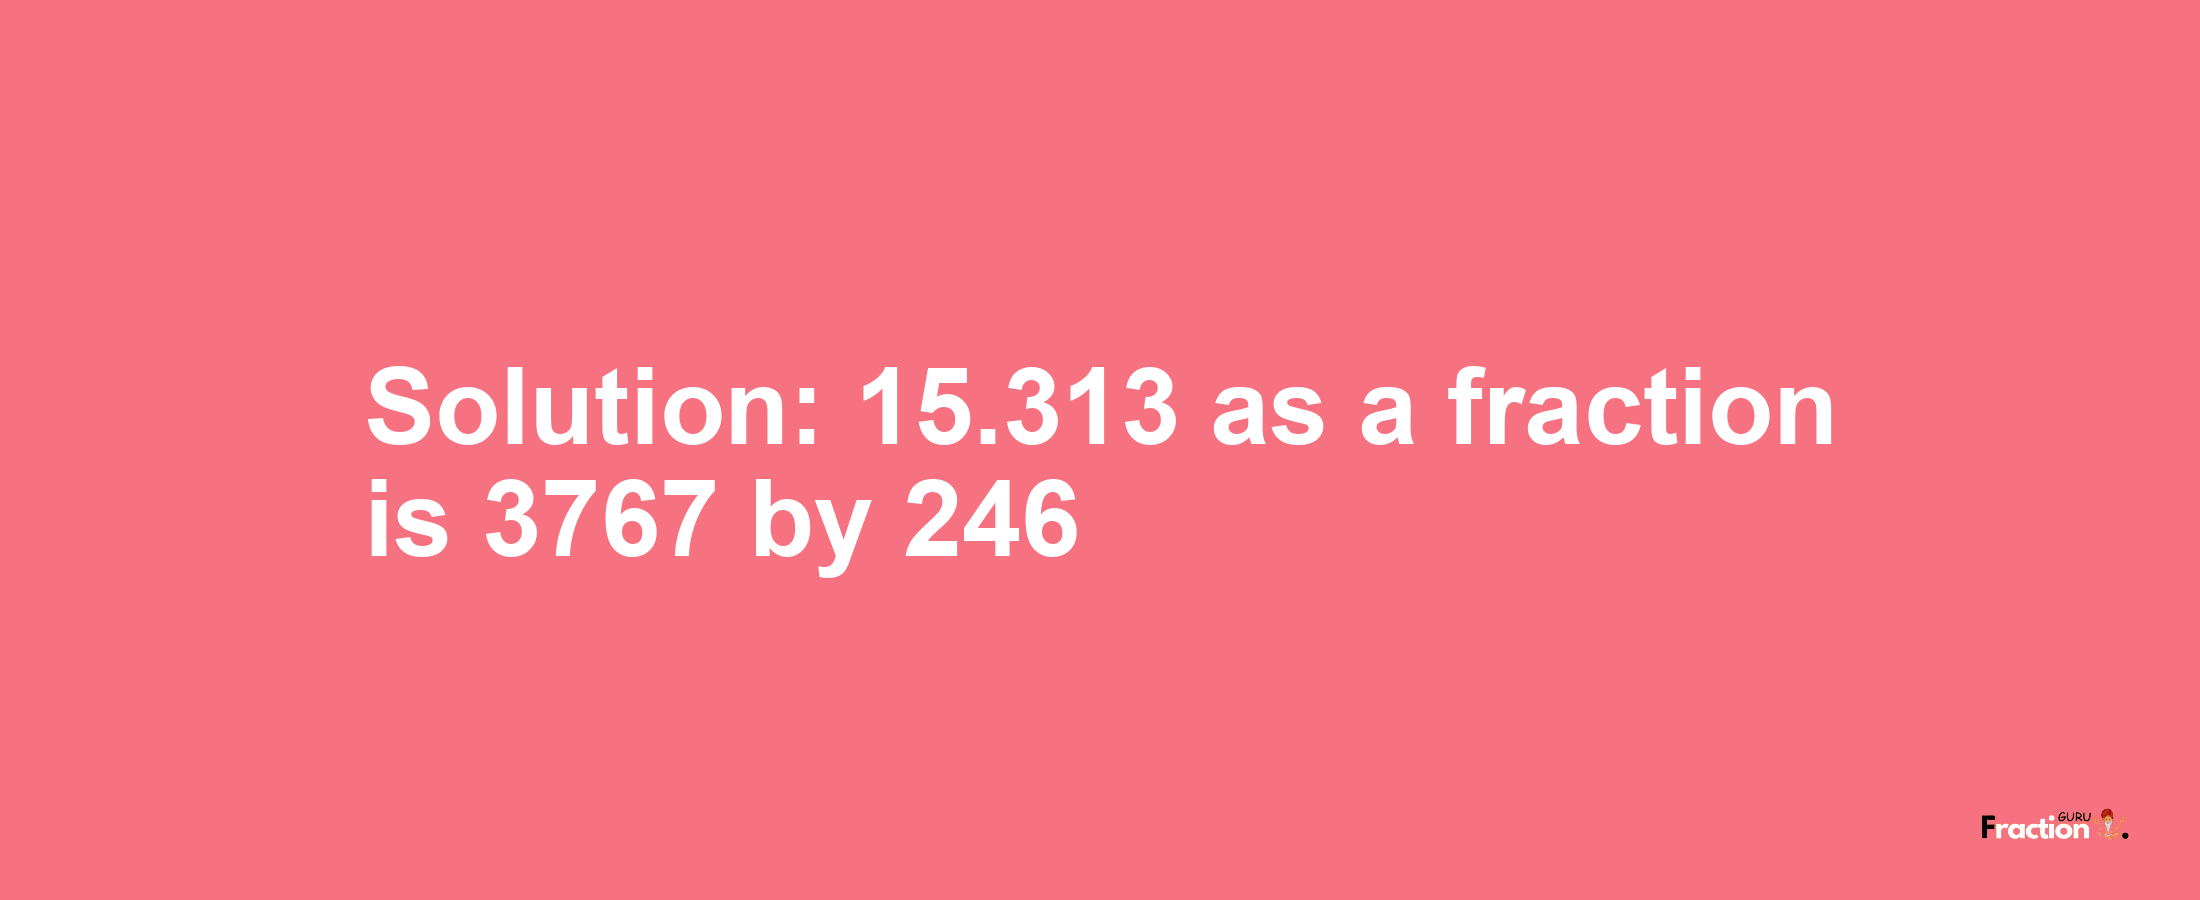 Solution:15.313 as a fraction is 3767/246